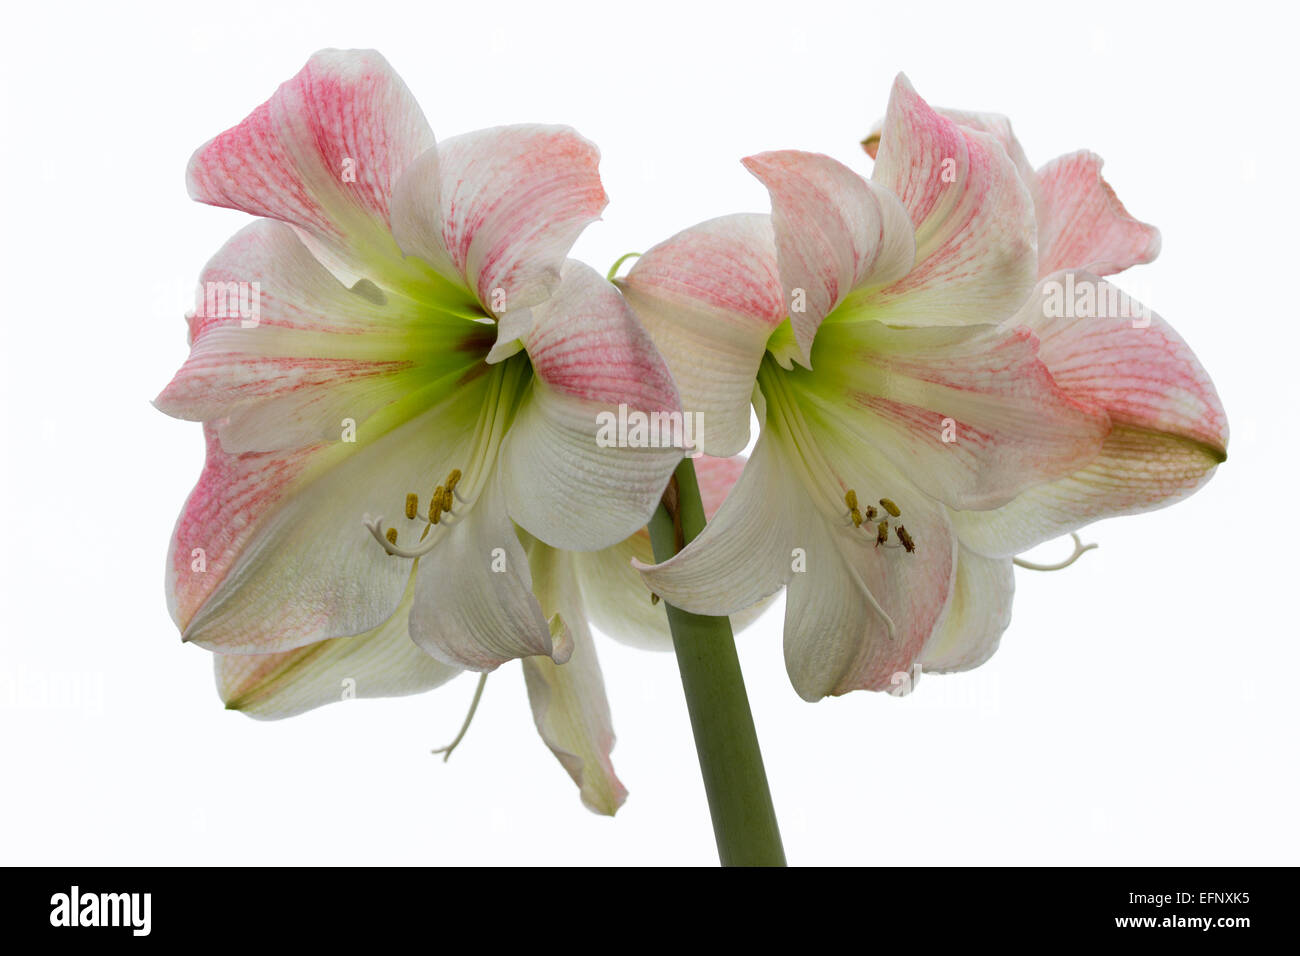 Flowers in the head of Hippeastrum 'Apple Blossom', the florist's Amaryliis, against a white background Stock Photo